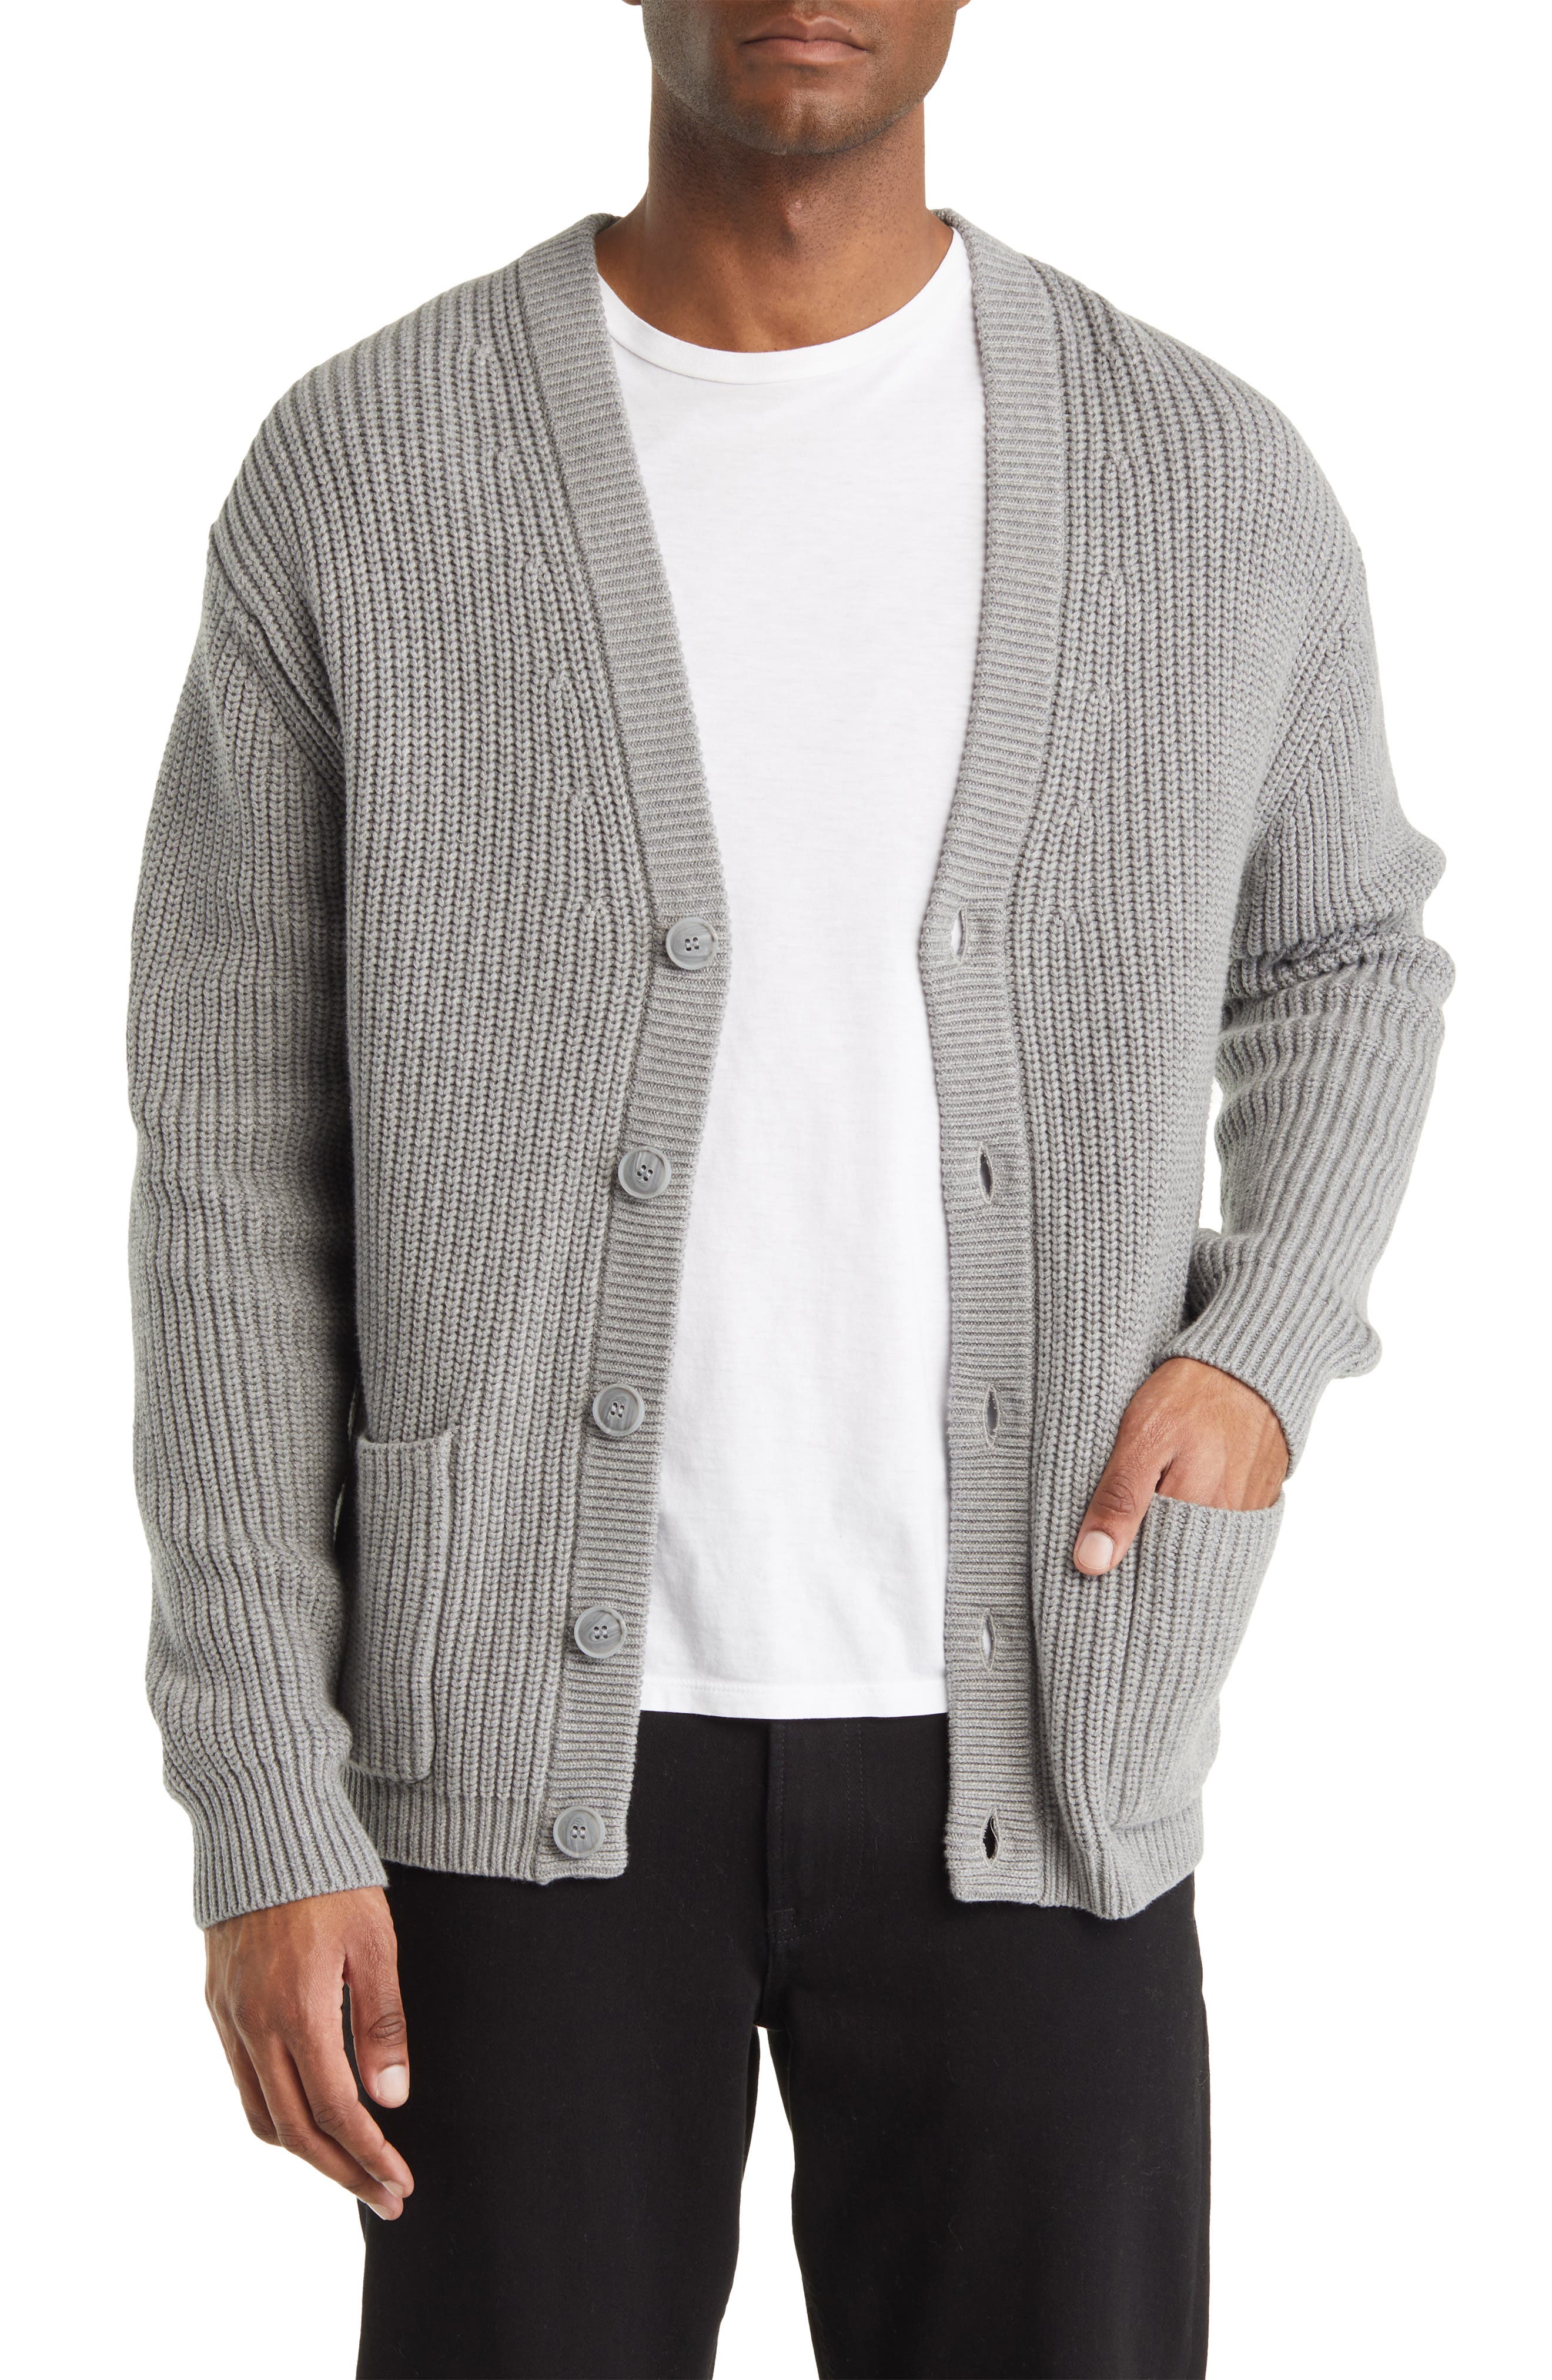 French Connection Mens Harvest Wool Cardigan Sweater 